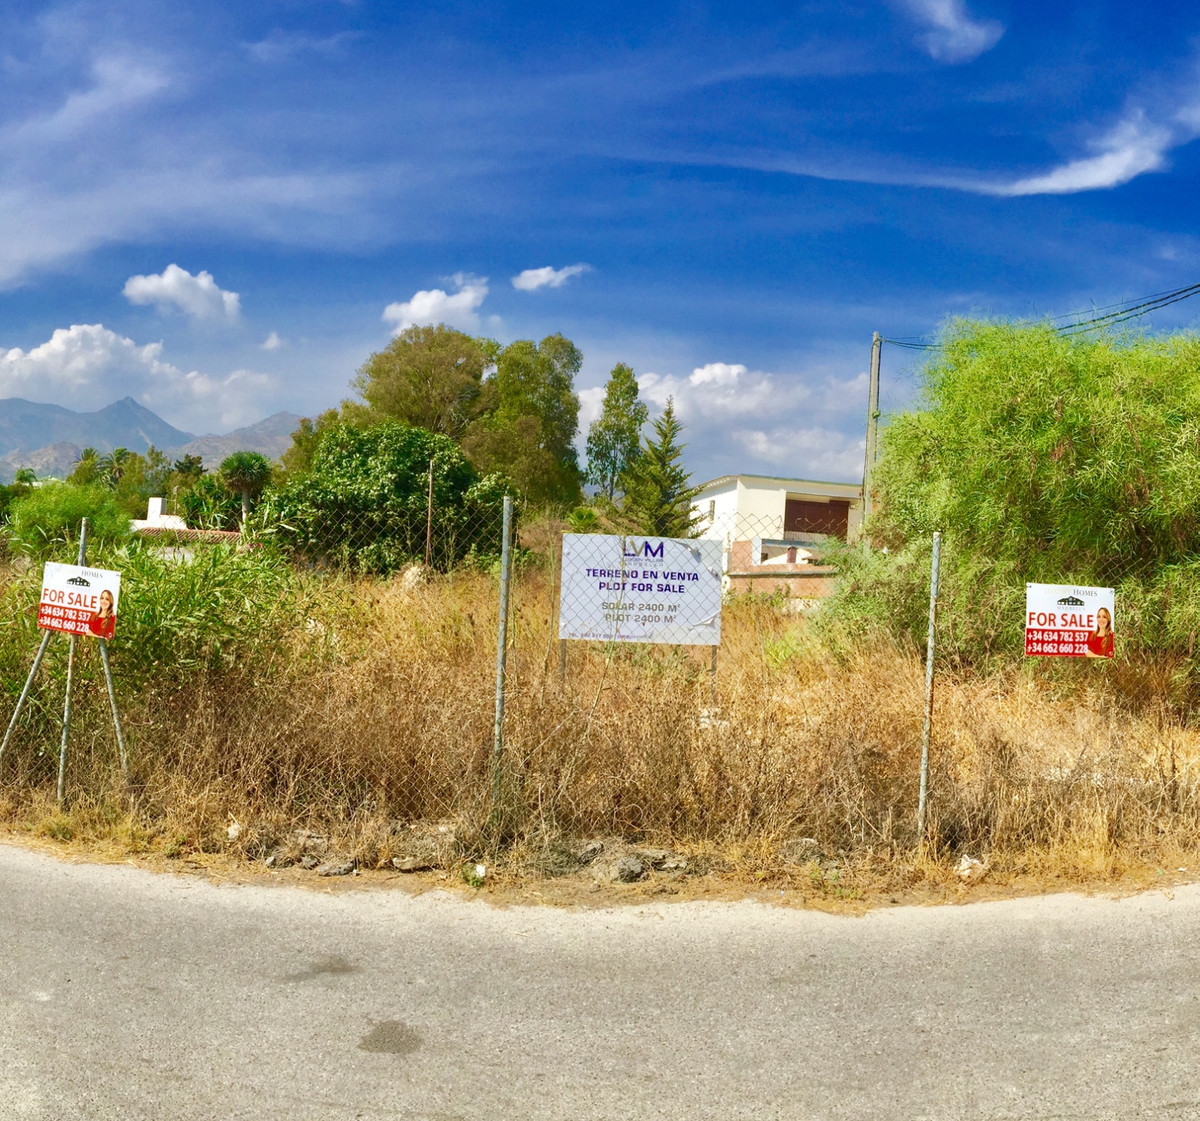 						Plot  Residential
													for sale 
																			 in Marbella
					